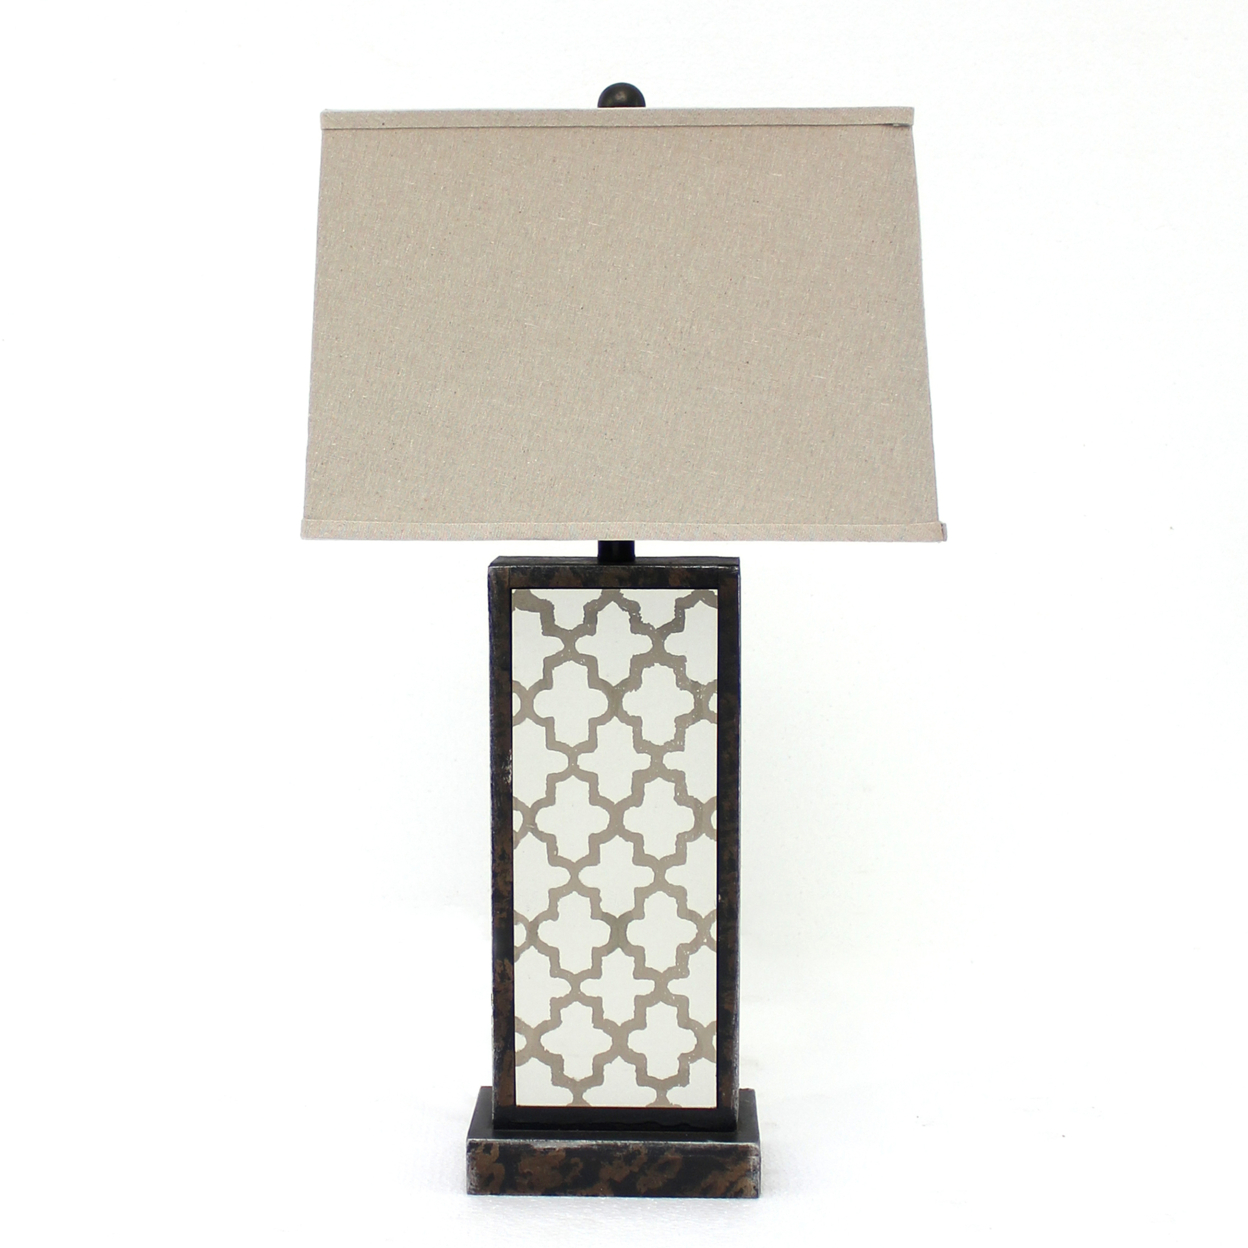 Rock Base Table Lamp With Drum Shade And Quatrefoil Pattern,Brown- Saltoro Sherpi